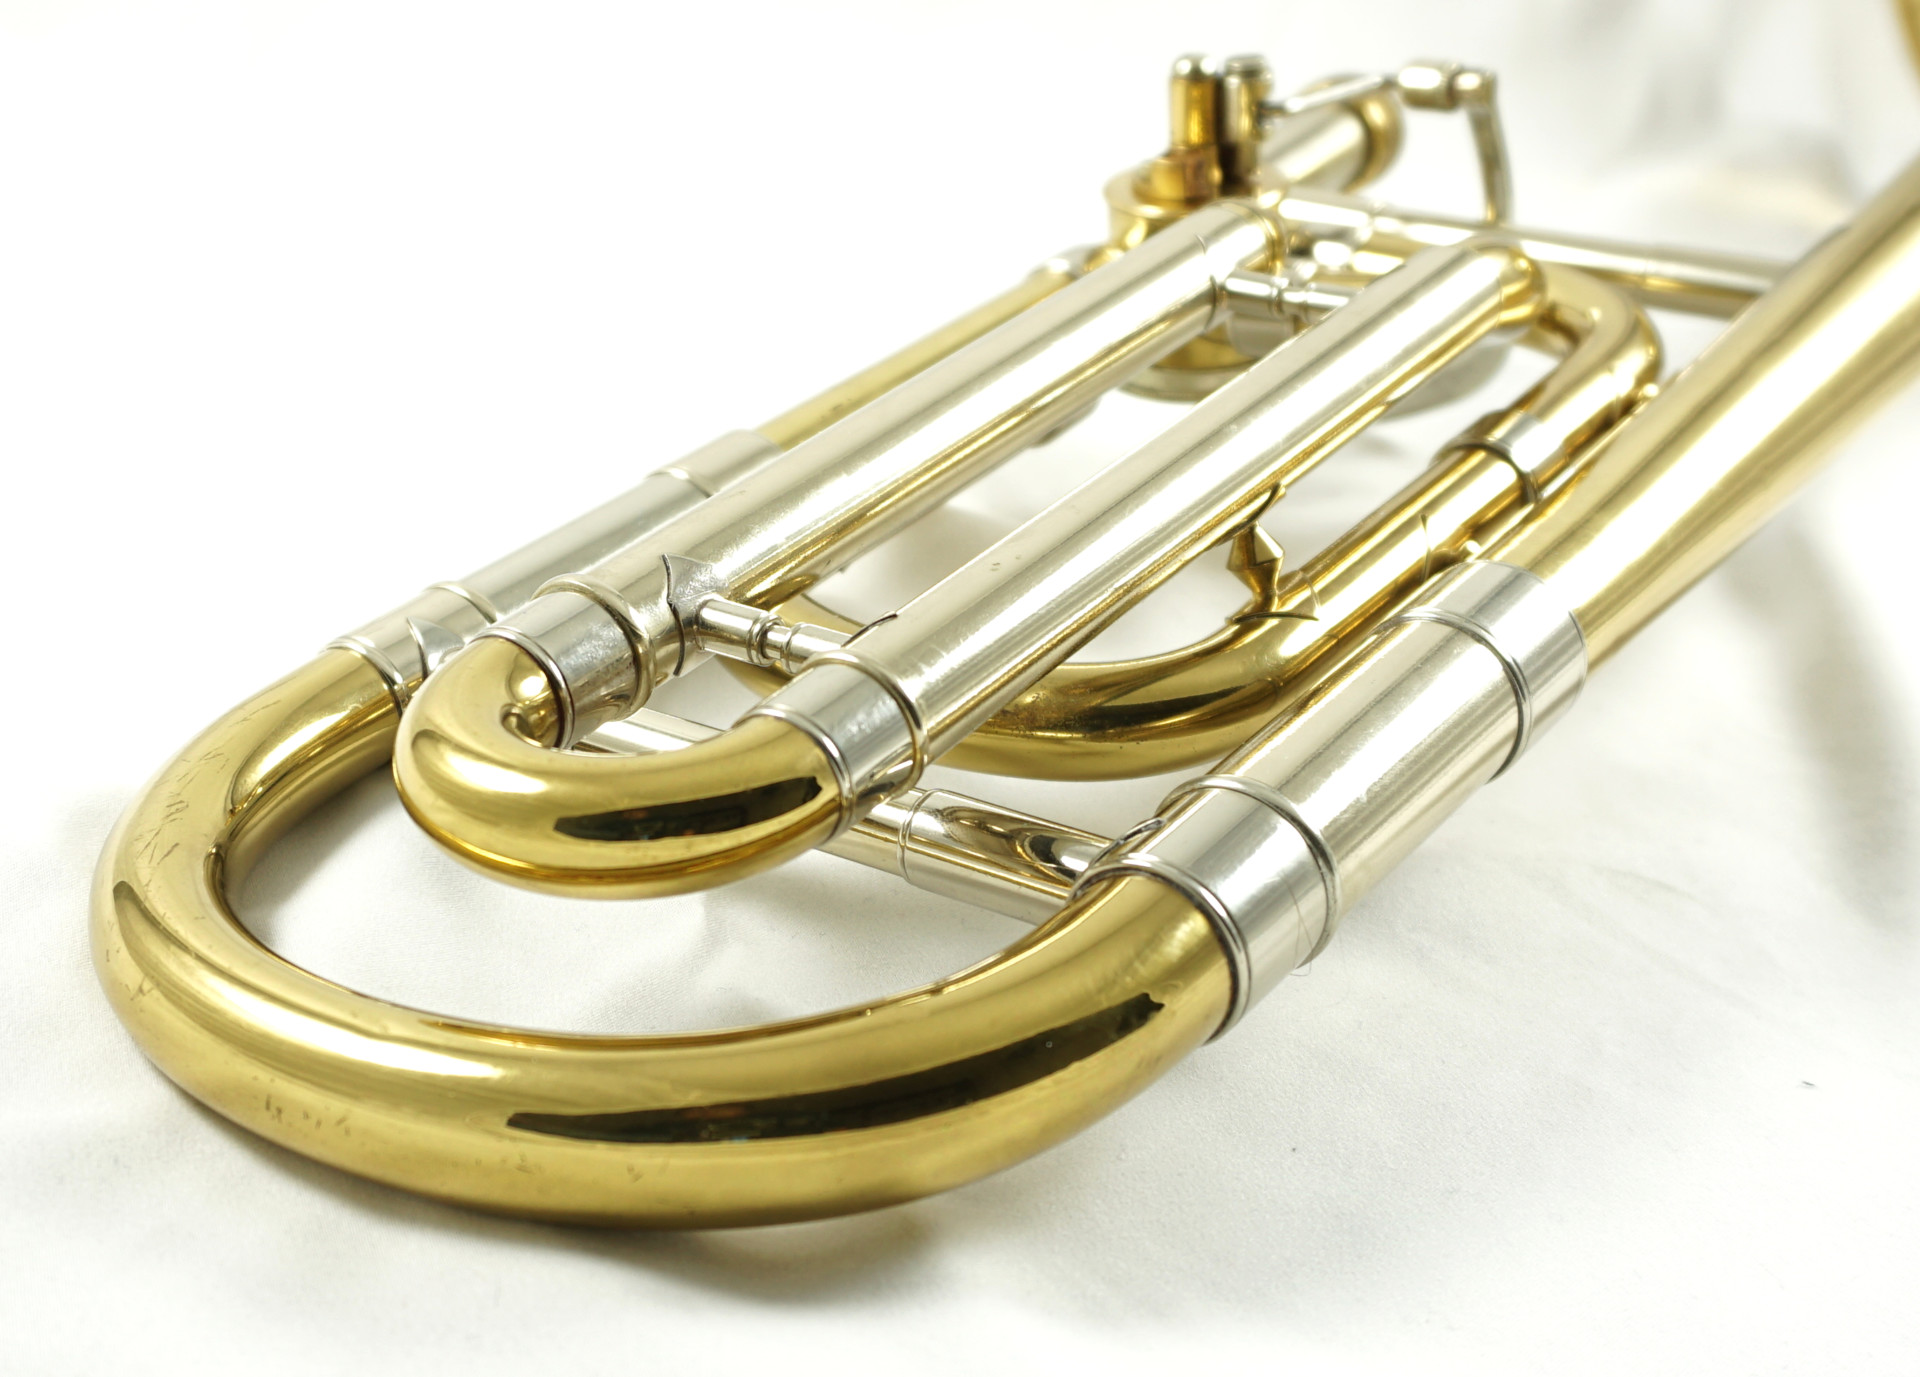 Corporation Bach Extravaganza #2: 42b yellow brass with standard